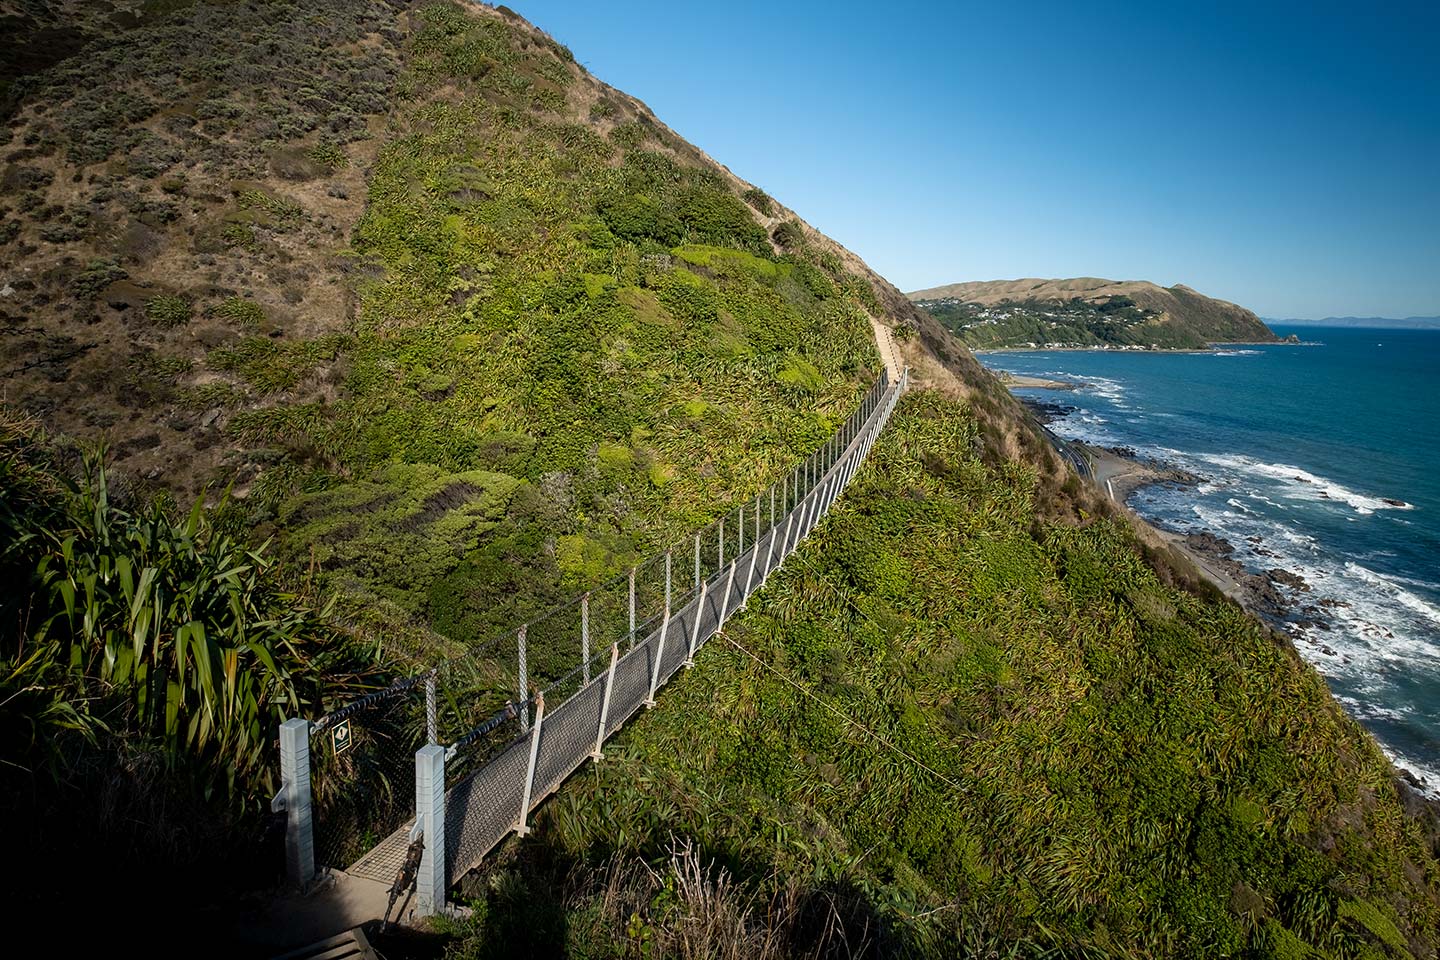 One of two swing bridges on the Paekakariki Escarpment track connects two hills. The land is covered in various green plants and in the background you can see the ocean.